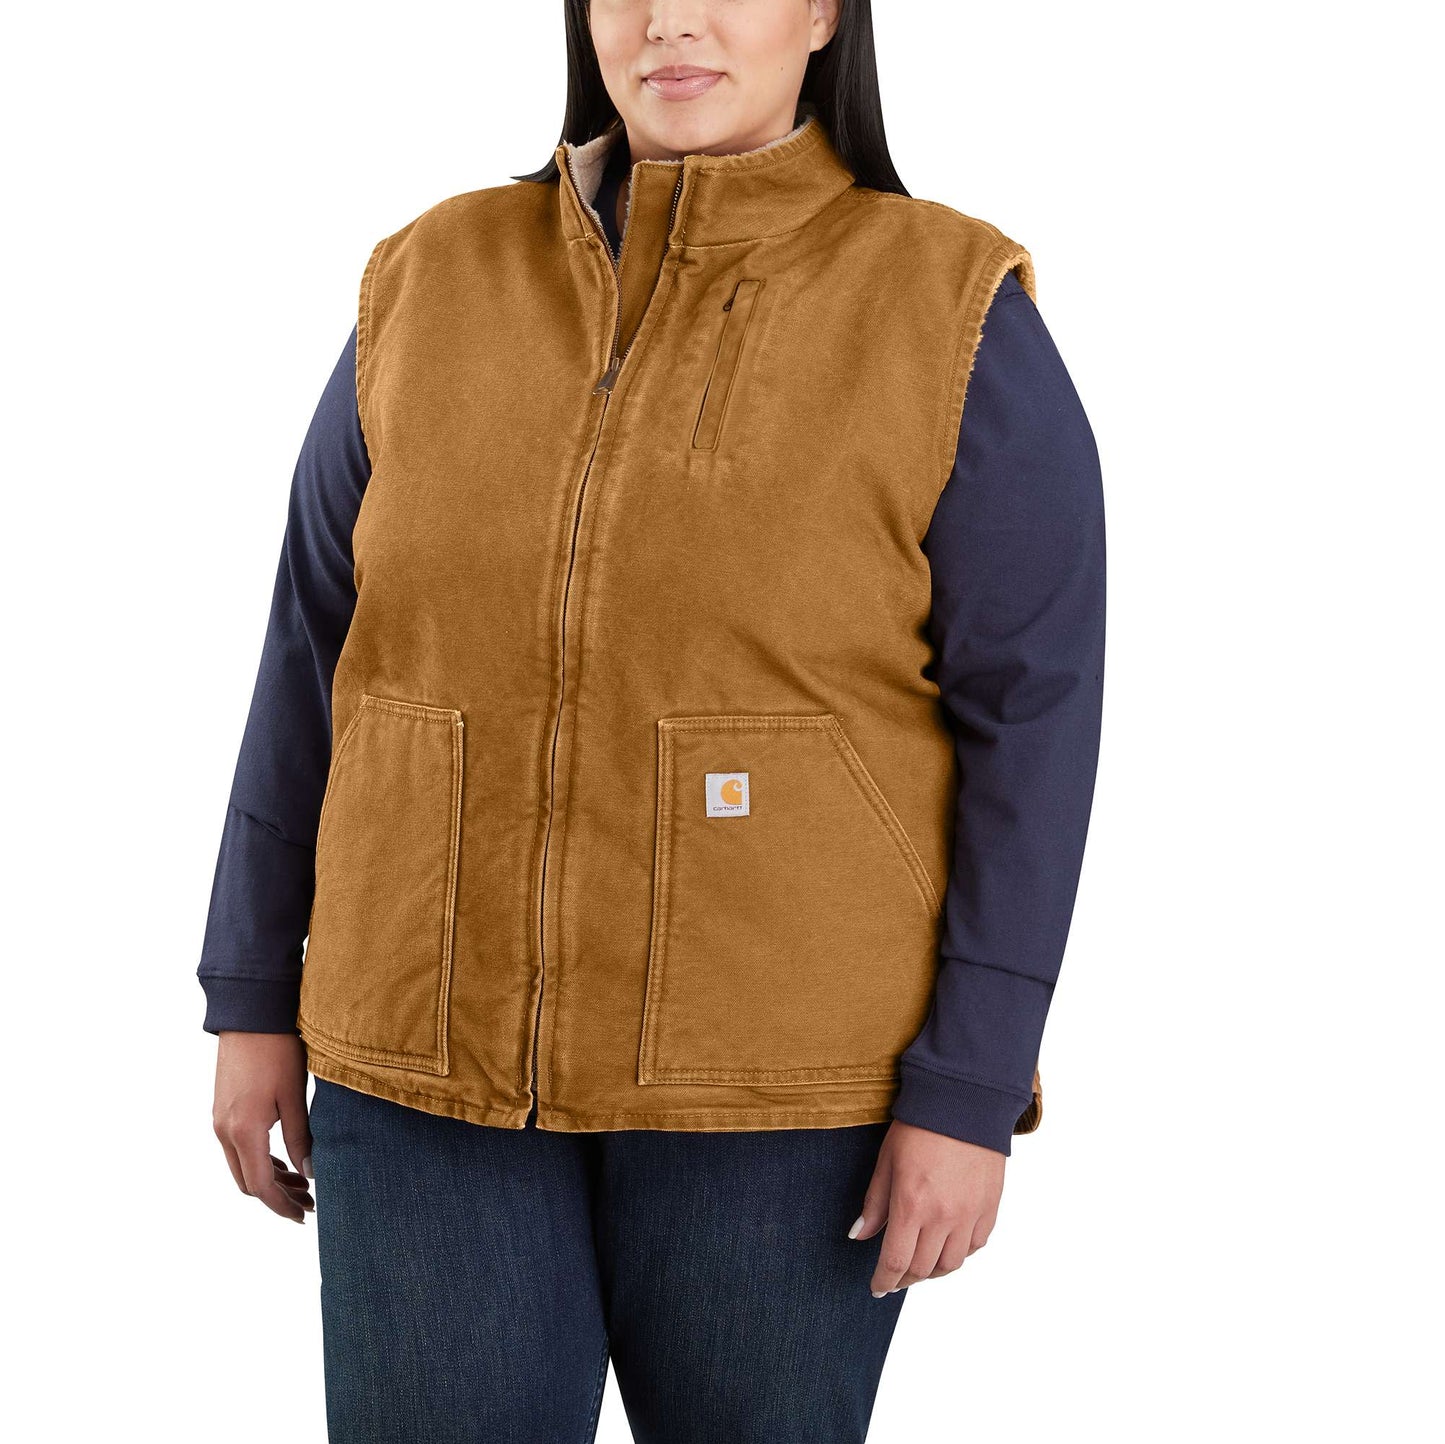 Loose Fit Washed Duck Sherpa Lined Mock Neck Vest by Carhartt 104277